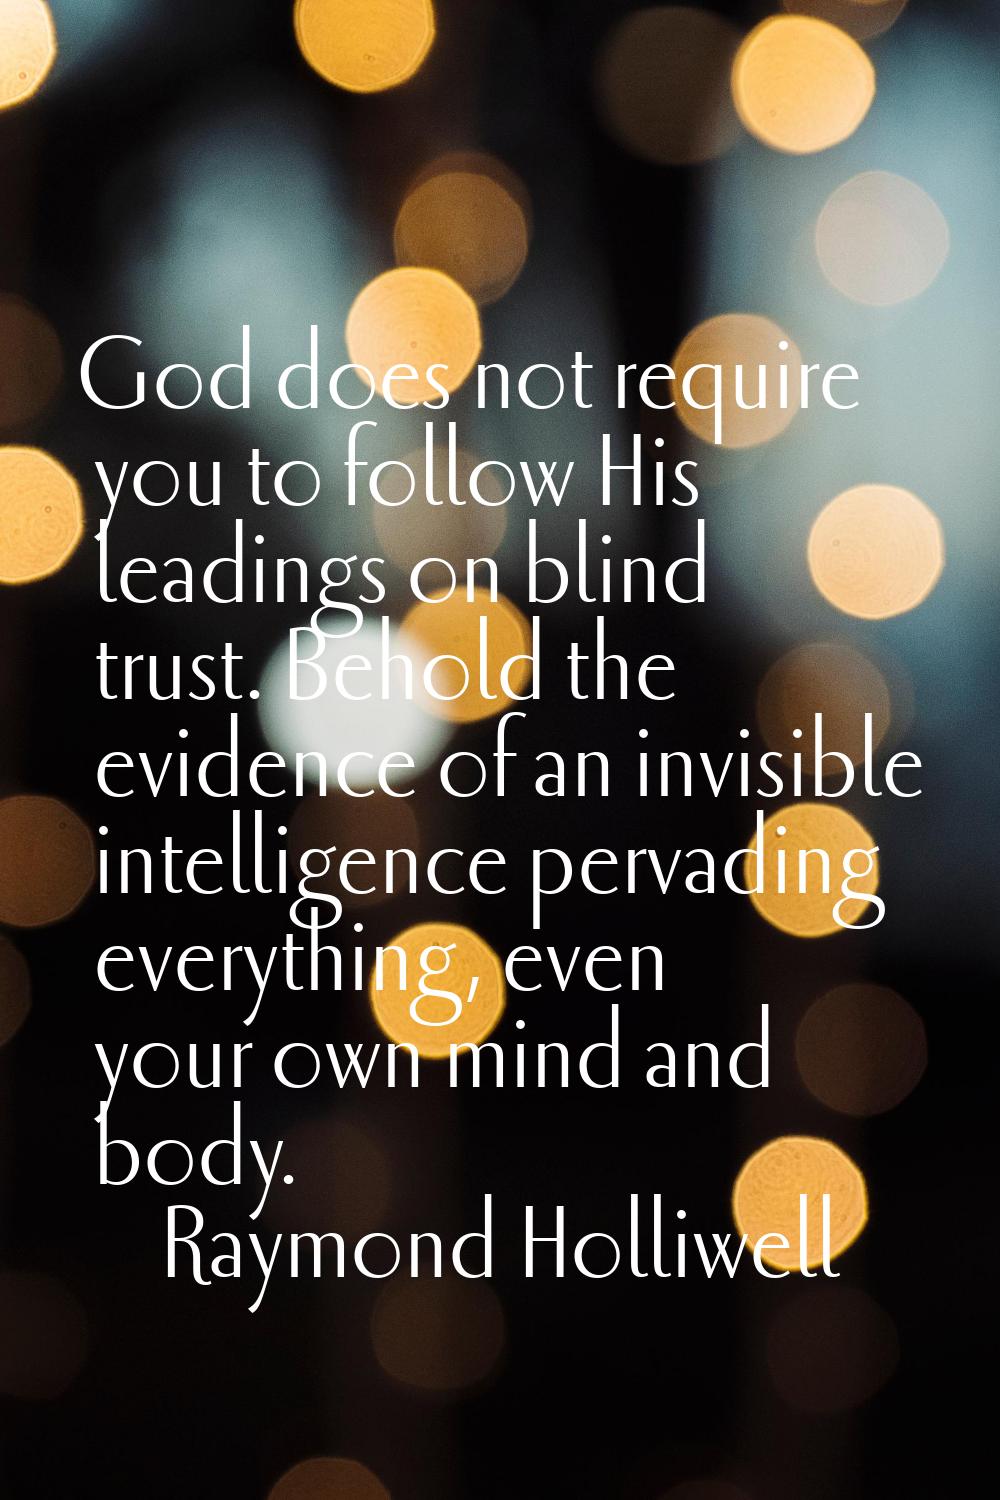 God does not require you to follow His leadings on blind trust. Behold the evidence of an invisible